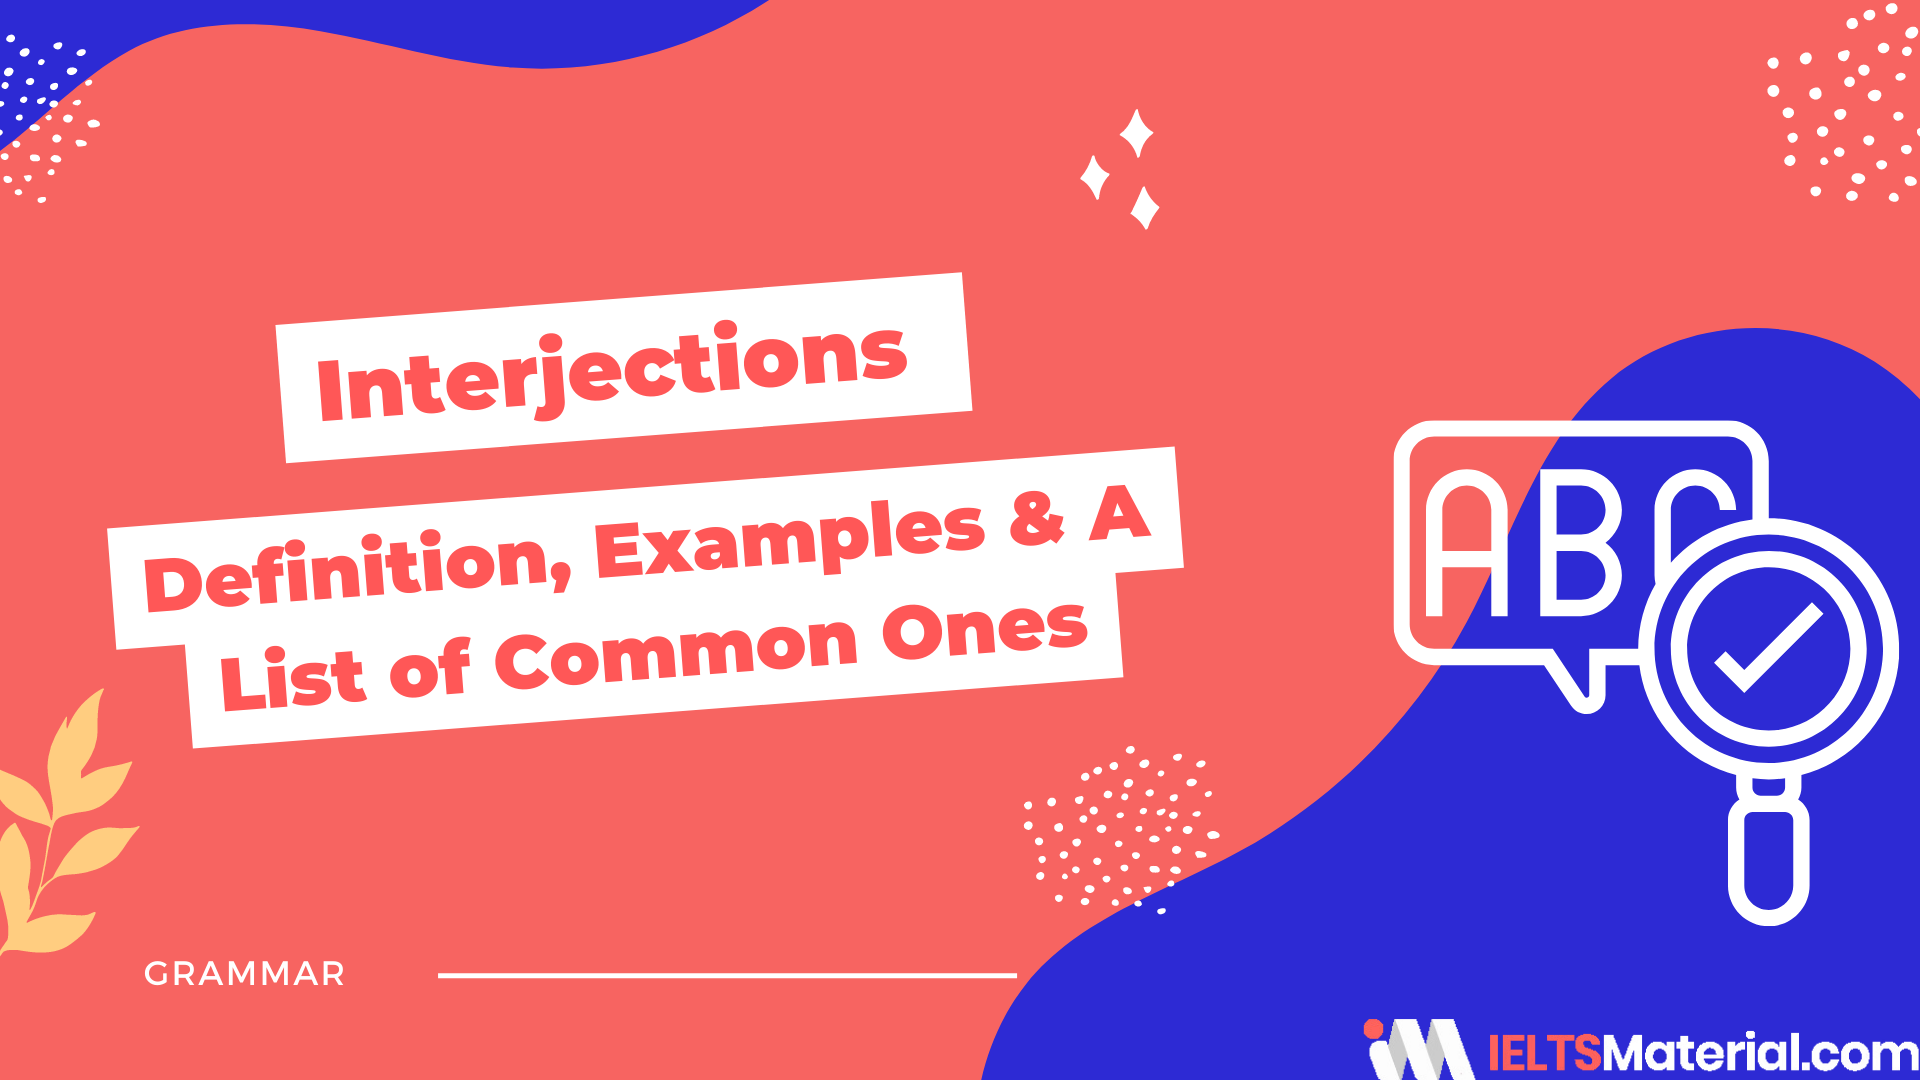 Exploring Interjections: Definition, Types, and Examples